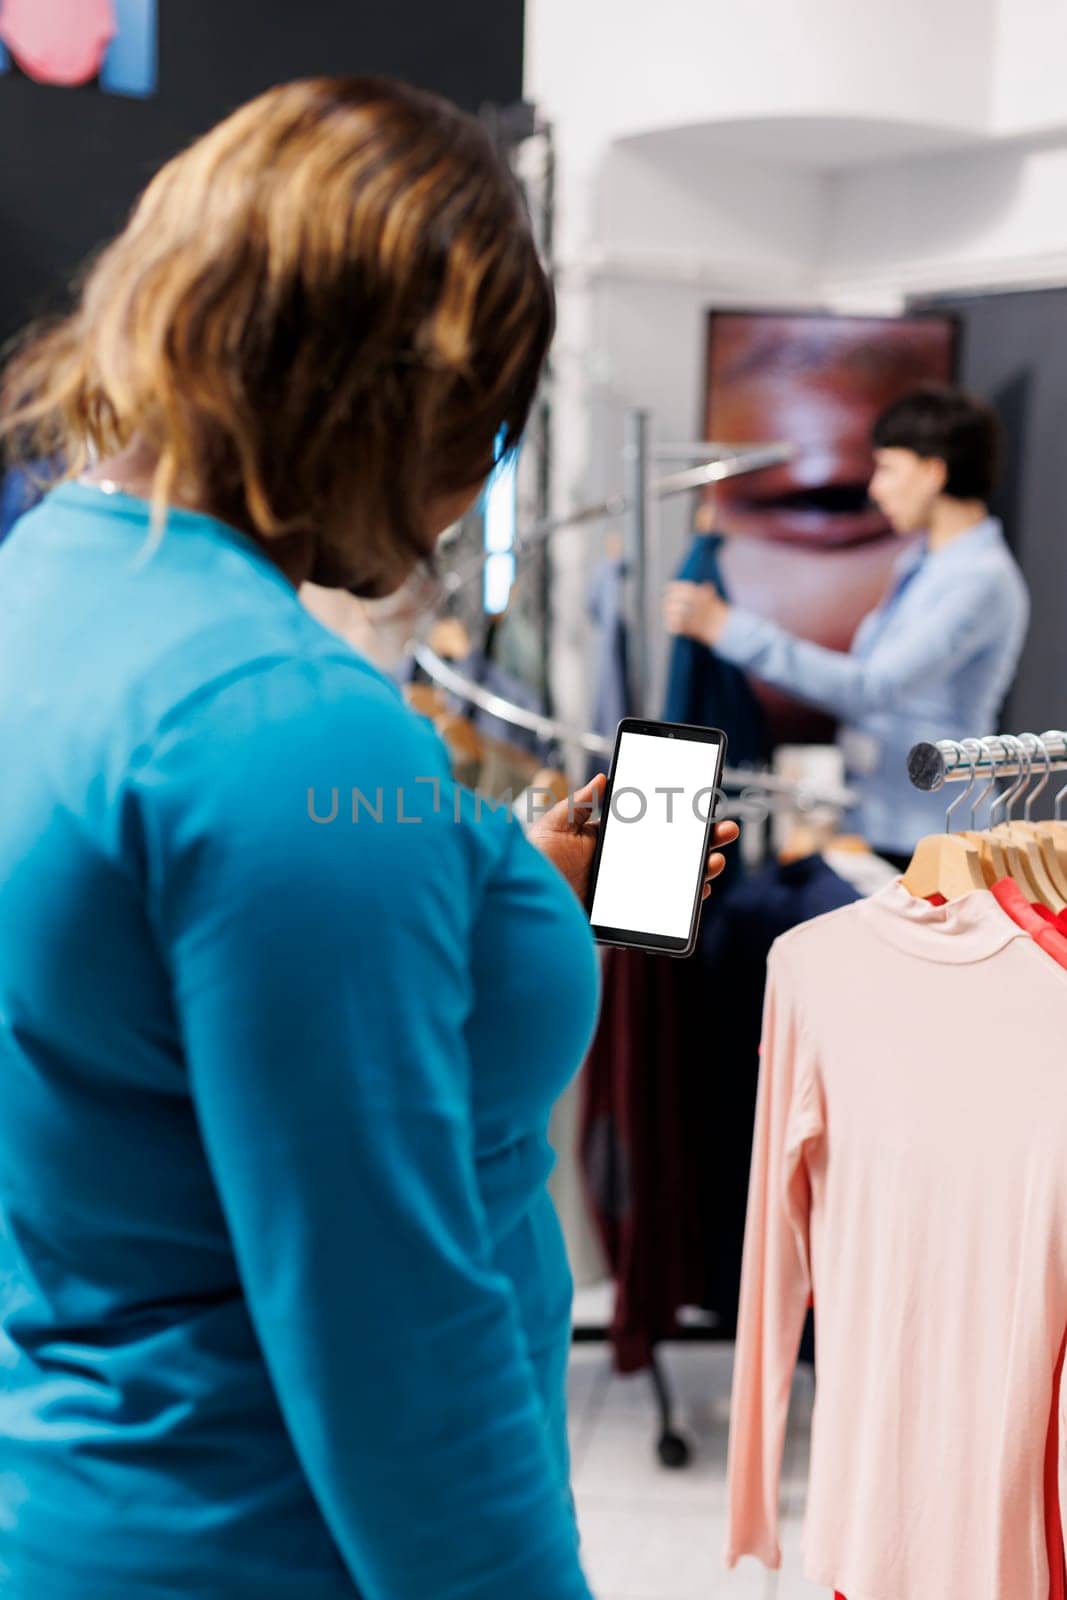 African american customer holding smartphone with white screen in shopping mall, checking fashion store app. Stylish woman buying fashionable merchandise in modern boutique. Technology concept